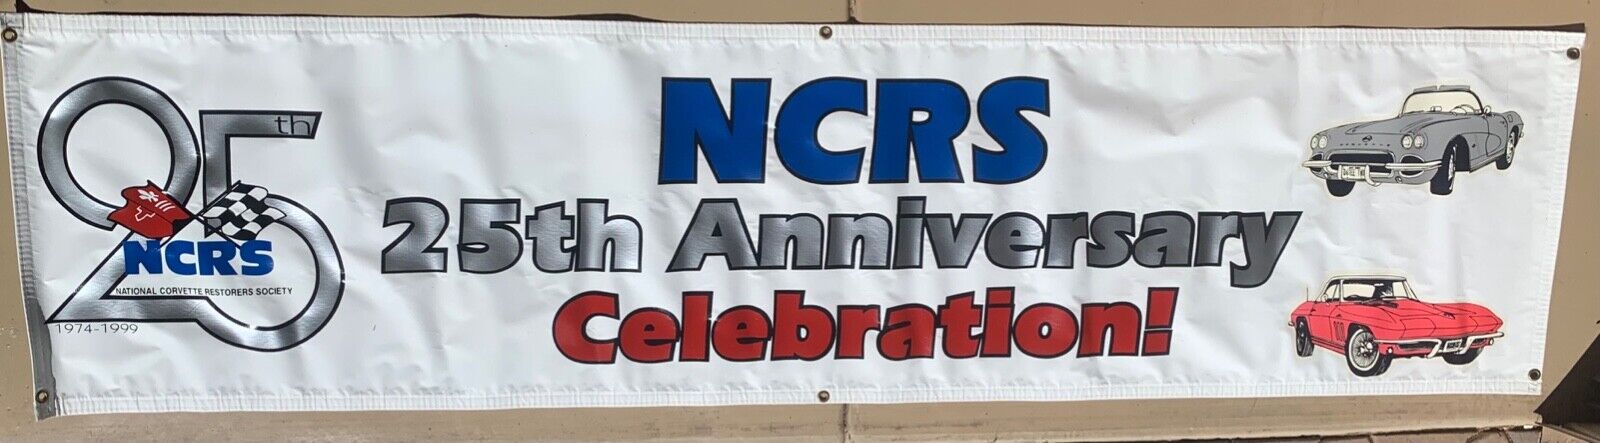 NCRS 25th Aniversary Celebration Banner